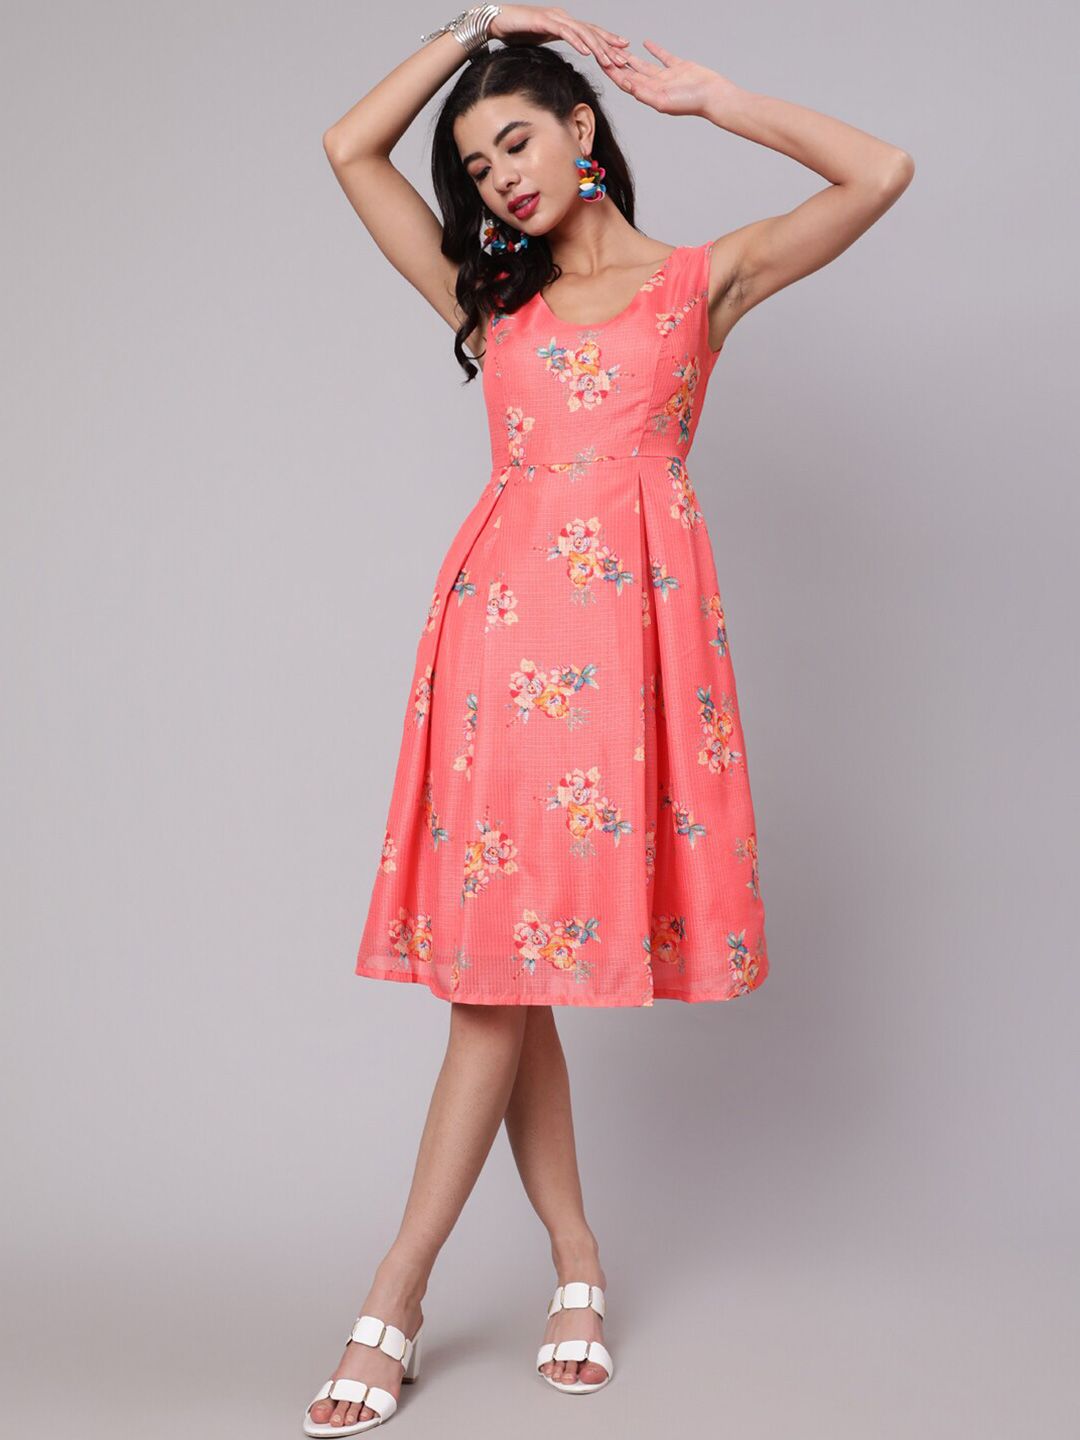 AKS Round Neck Floral Printed Pleated Cotton Fit & Flare Dress Price in India